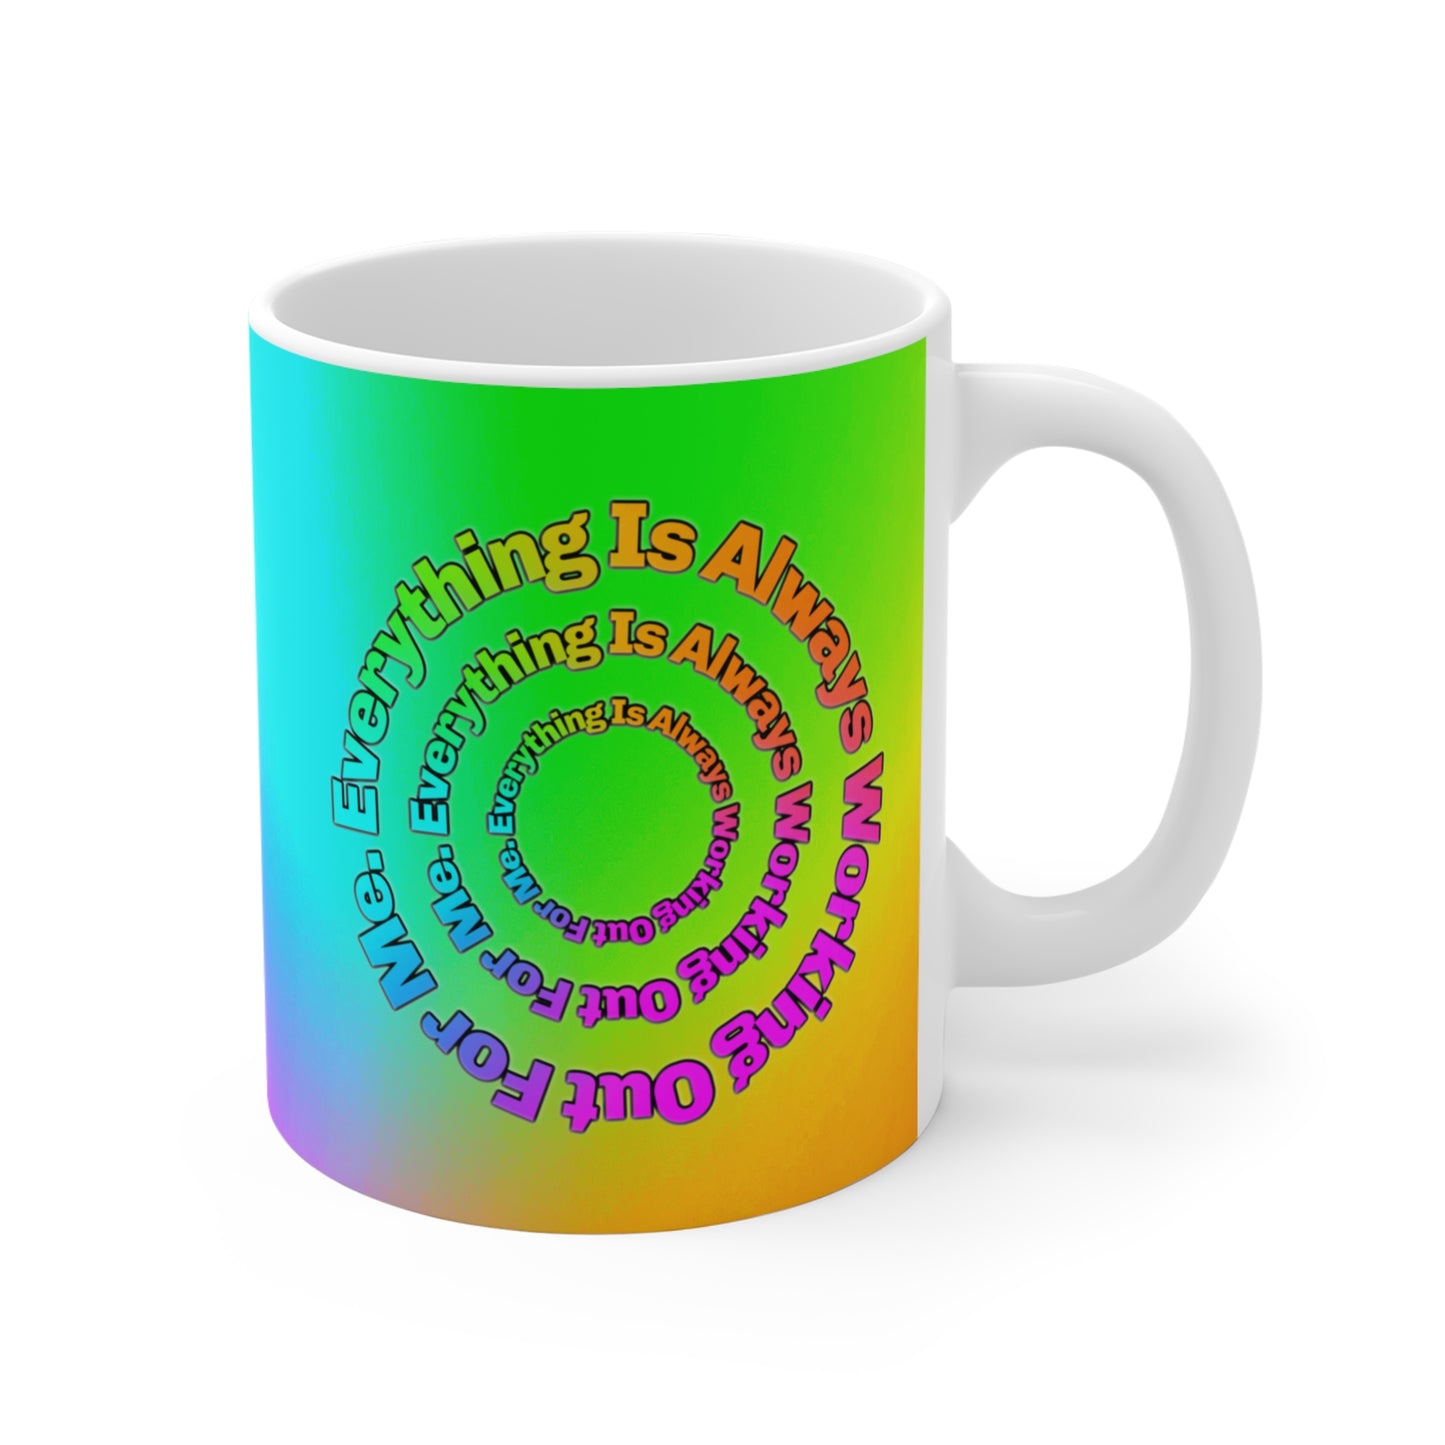 Everything Is Always Working Out For Me - Abraham Hicks Quote Mug 11oz